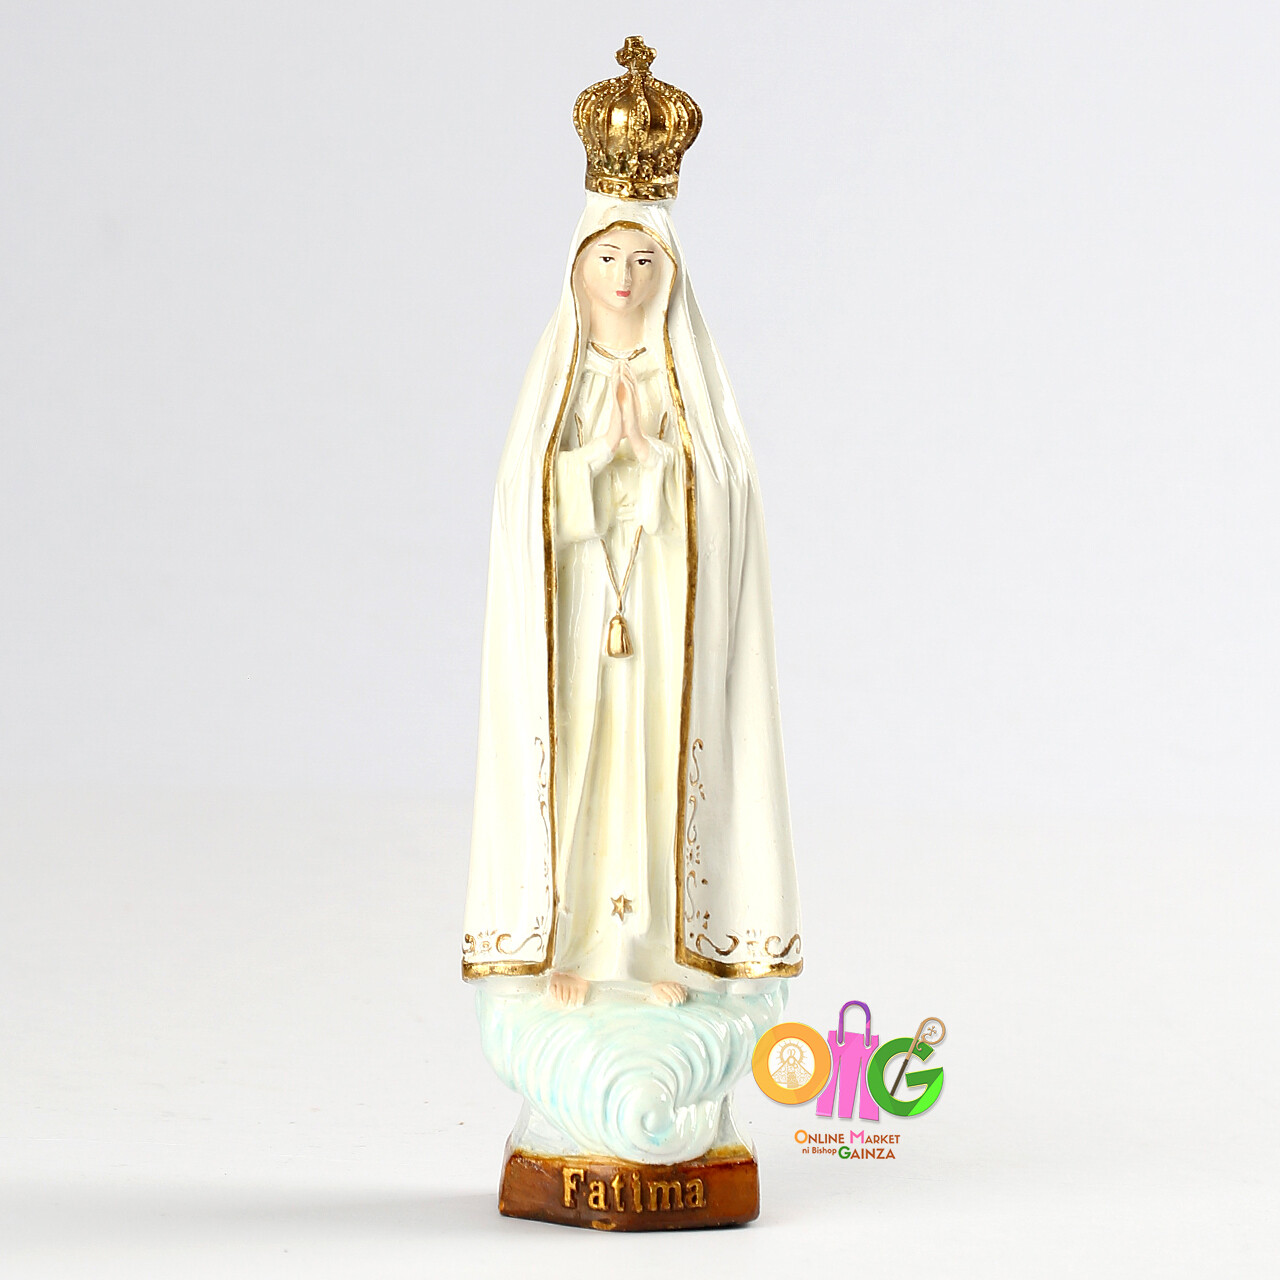 Daughters Of Mary - Our Lady of Mary the Fatima Image